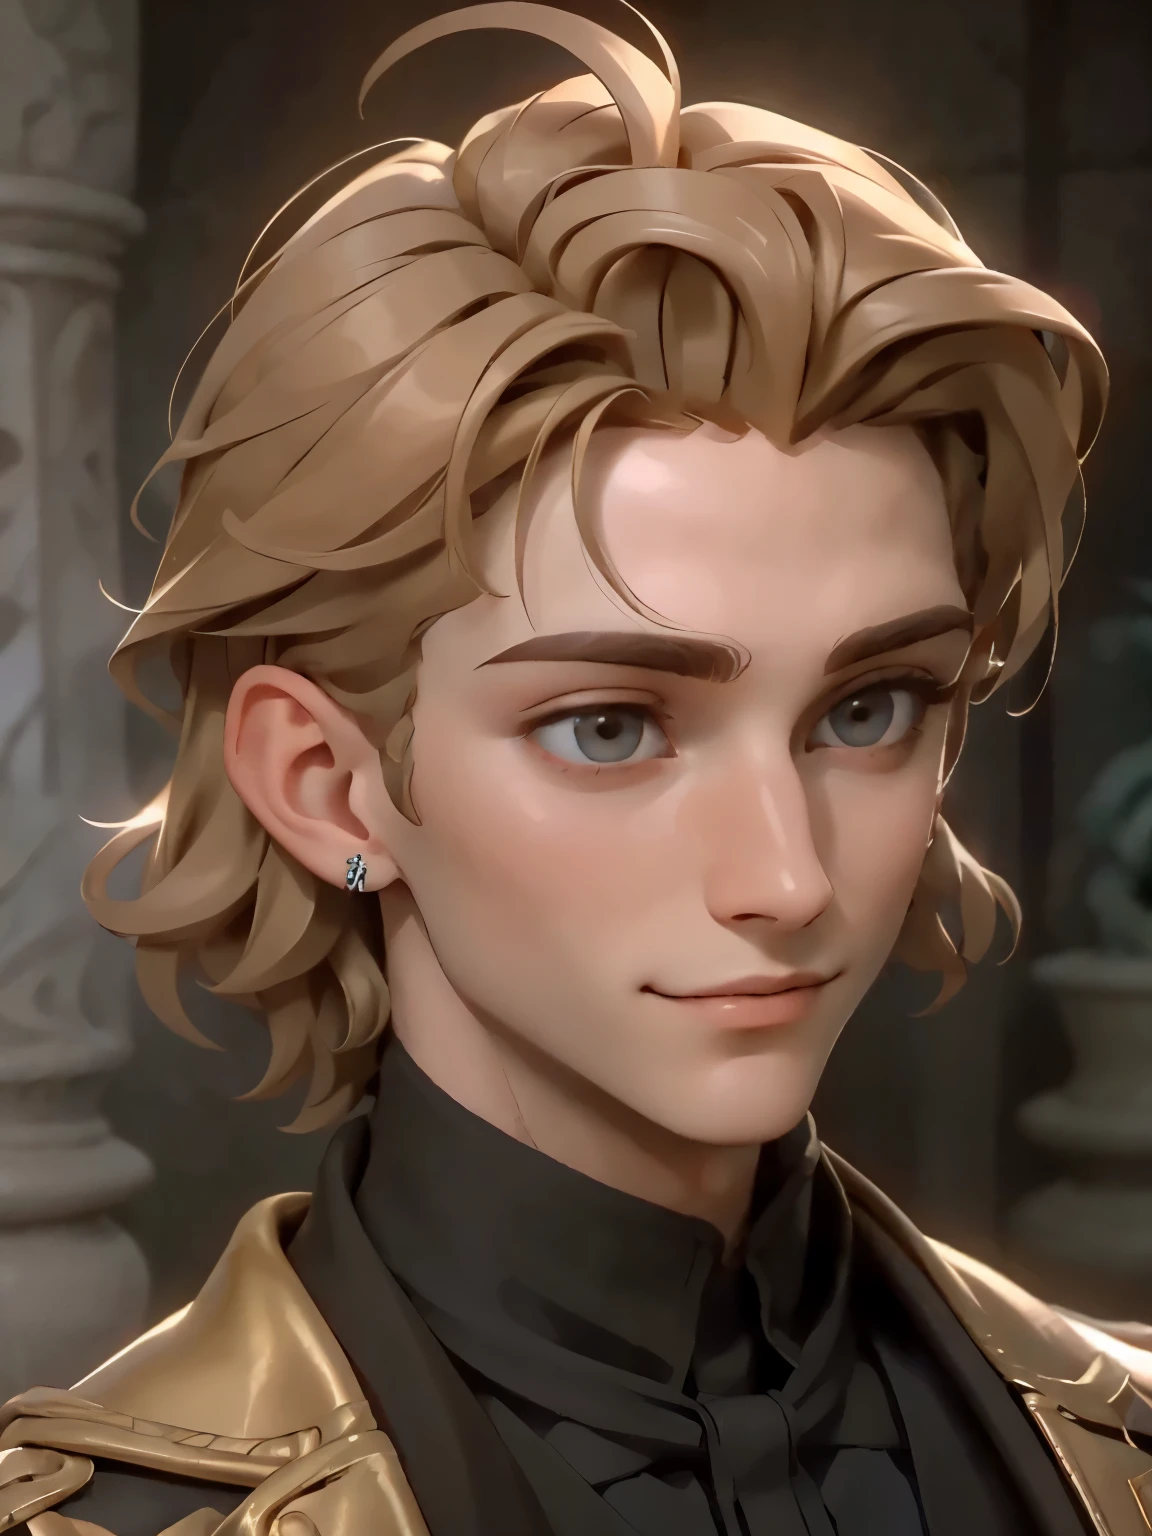 Nikolai is 20 years old, he has tanned skin, golden hair, shaved on one side and styled on the other, light brown eyes and slightly hooked nose, he has a beautiful face, &quot;outlined by the features of a fairy-tale prince&quot;. He is described as extremely charming, handsome and smiling